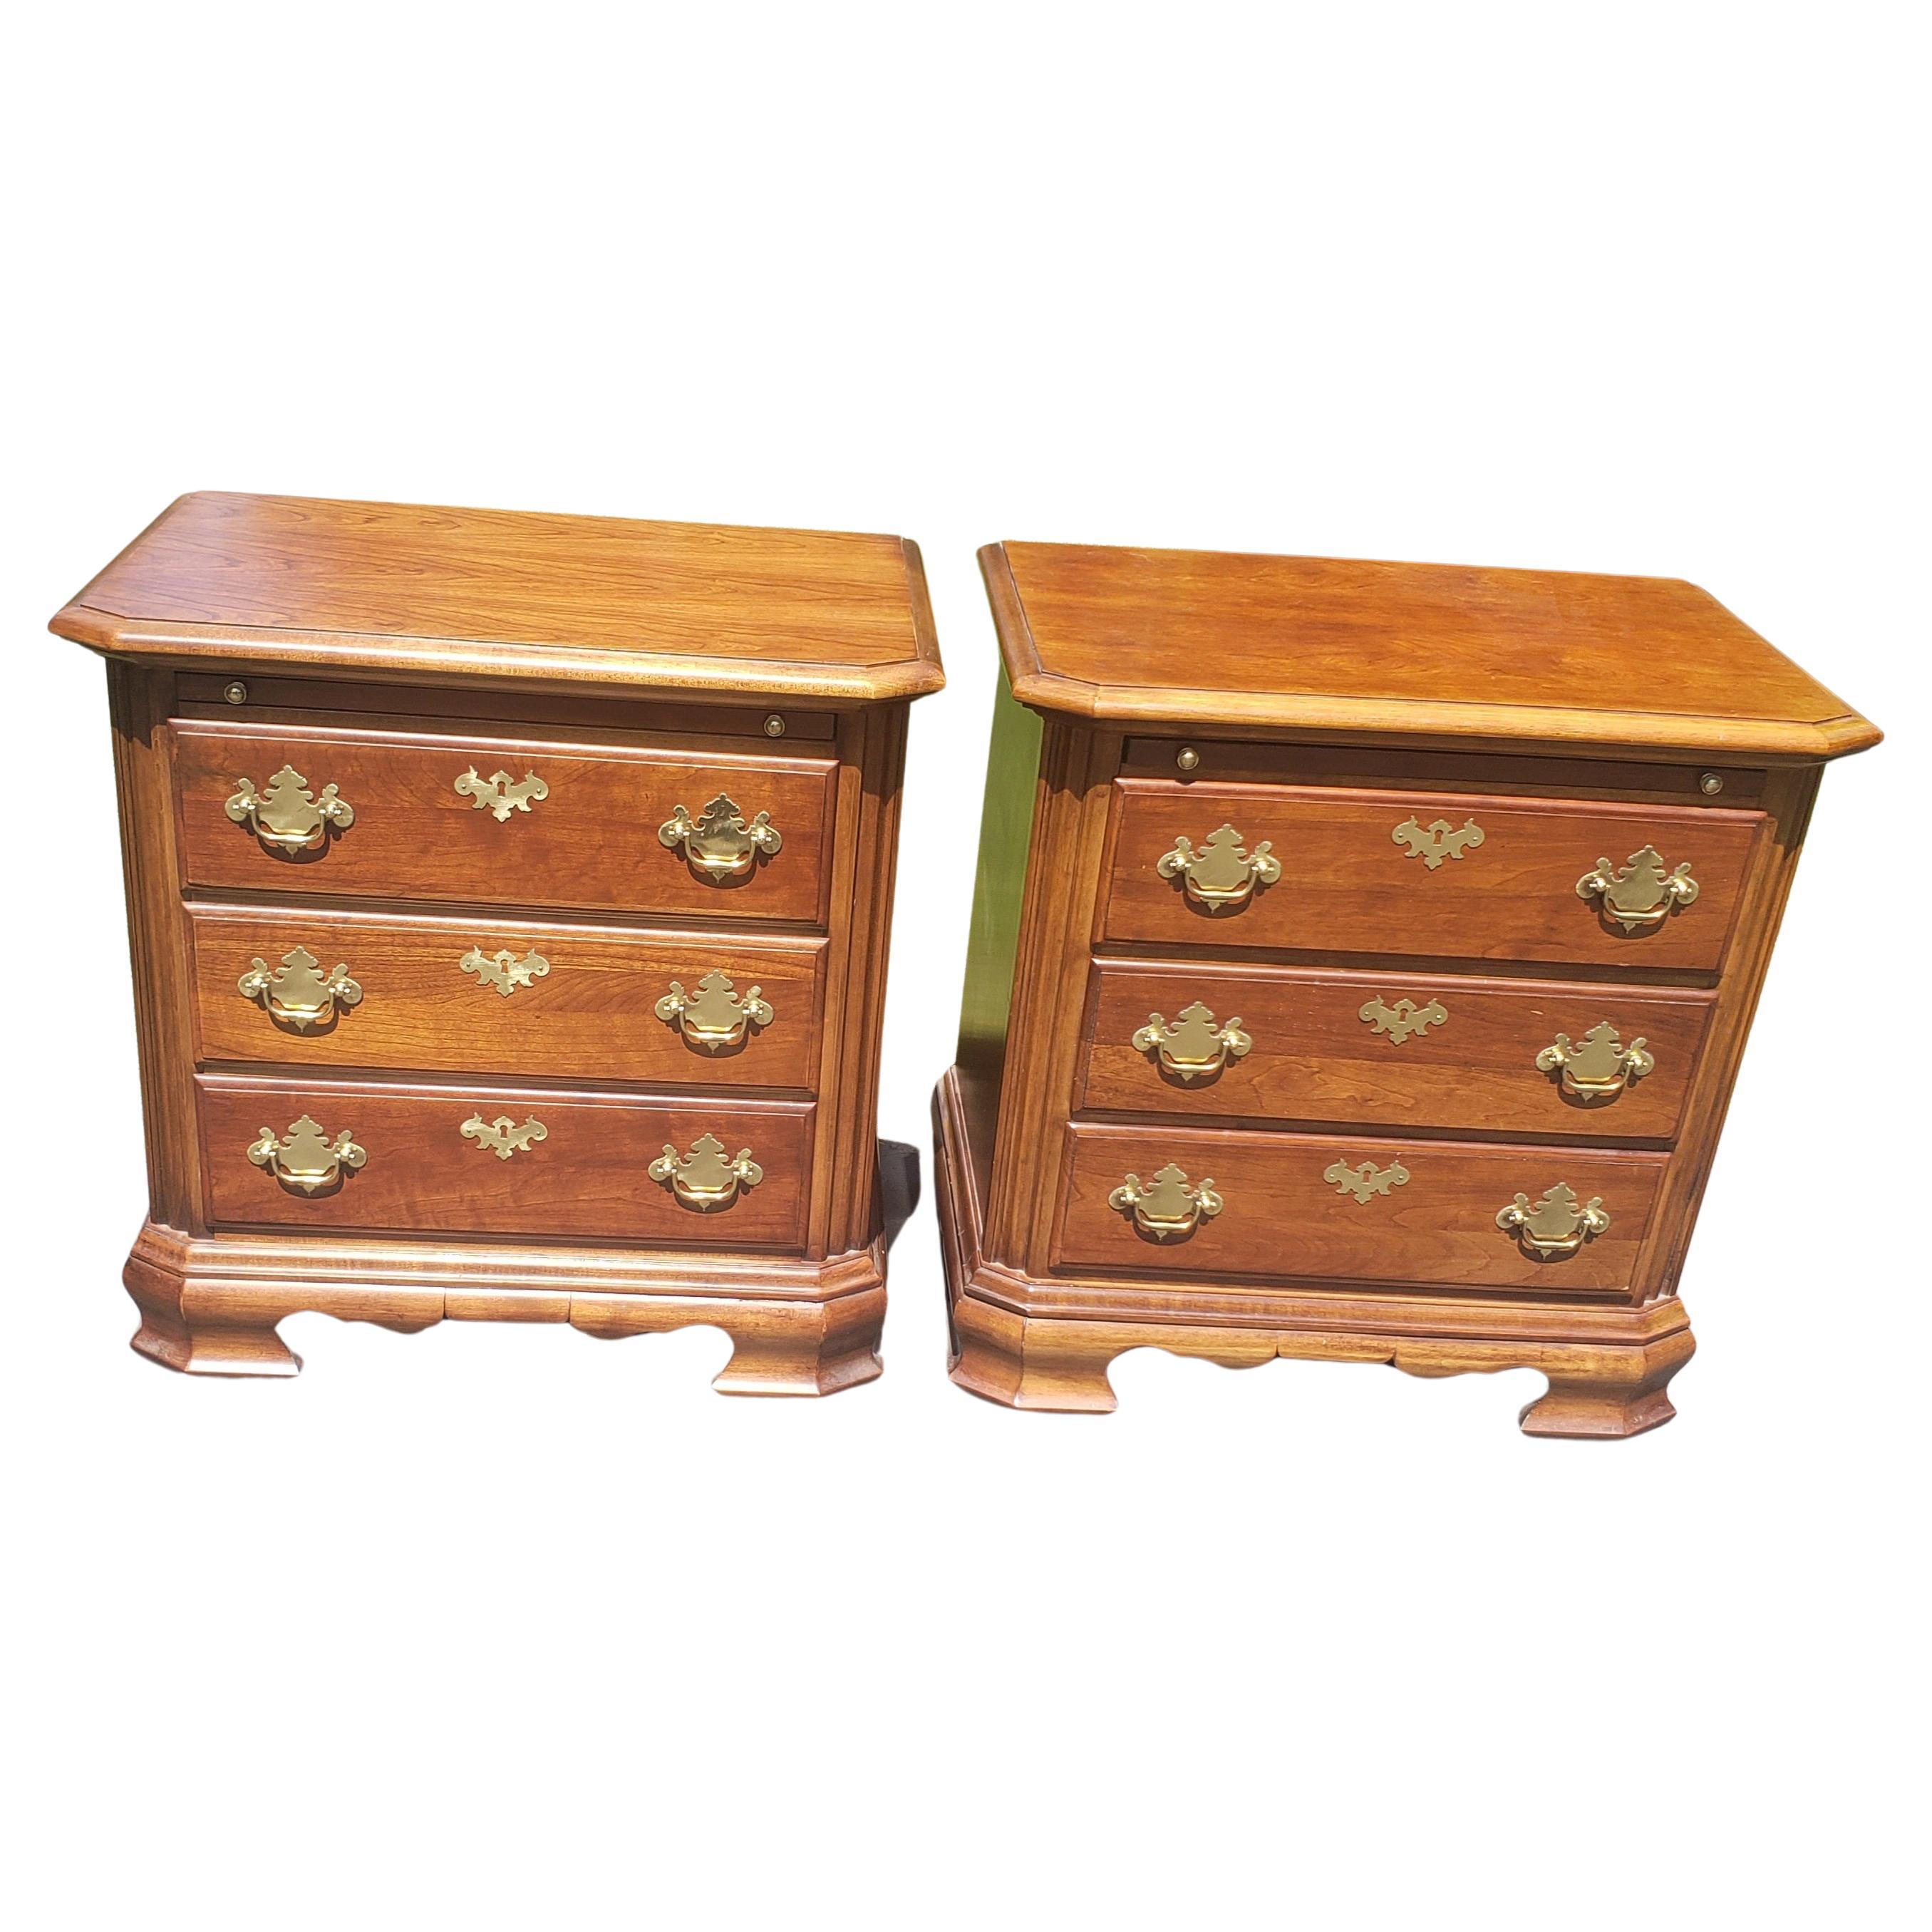 Beautifully crafted pair of Chippendale bedside tables from American Craftman Collection by Stanley Furniture. Solid cherry with brass handles. Pull out tray, smooth dovetailed drawers. Very good condition. Minor wear, appropriate with age and